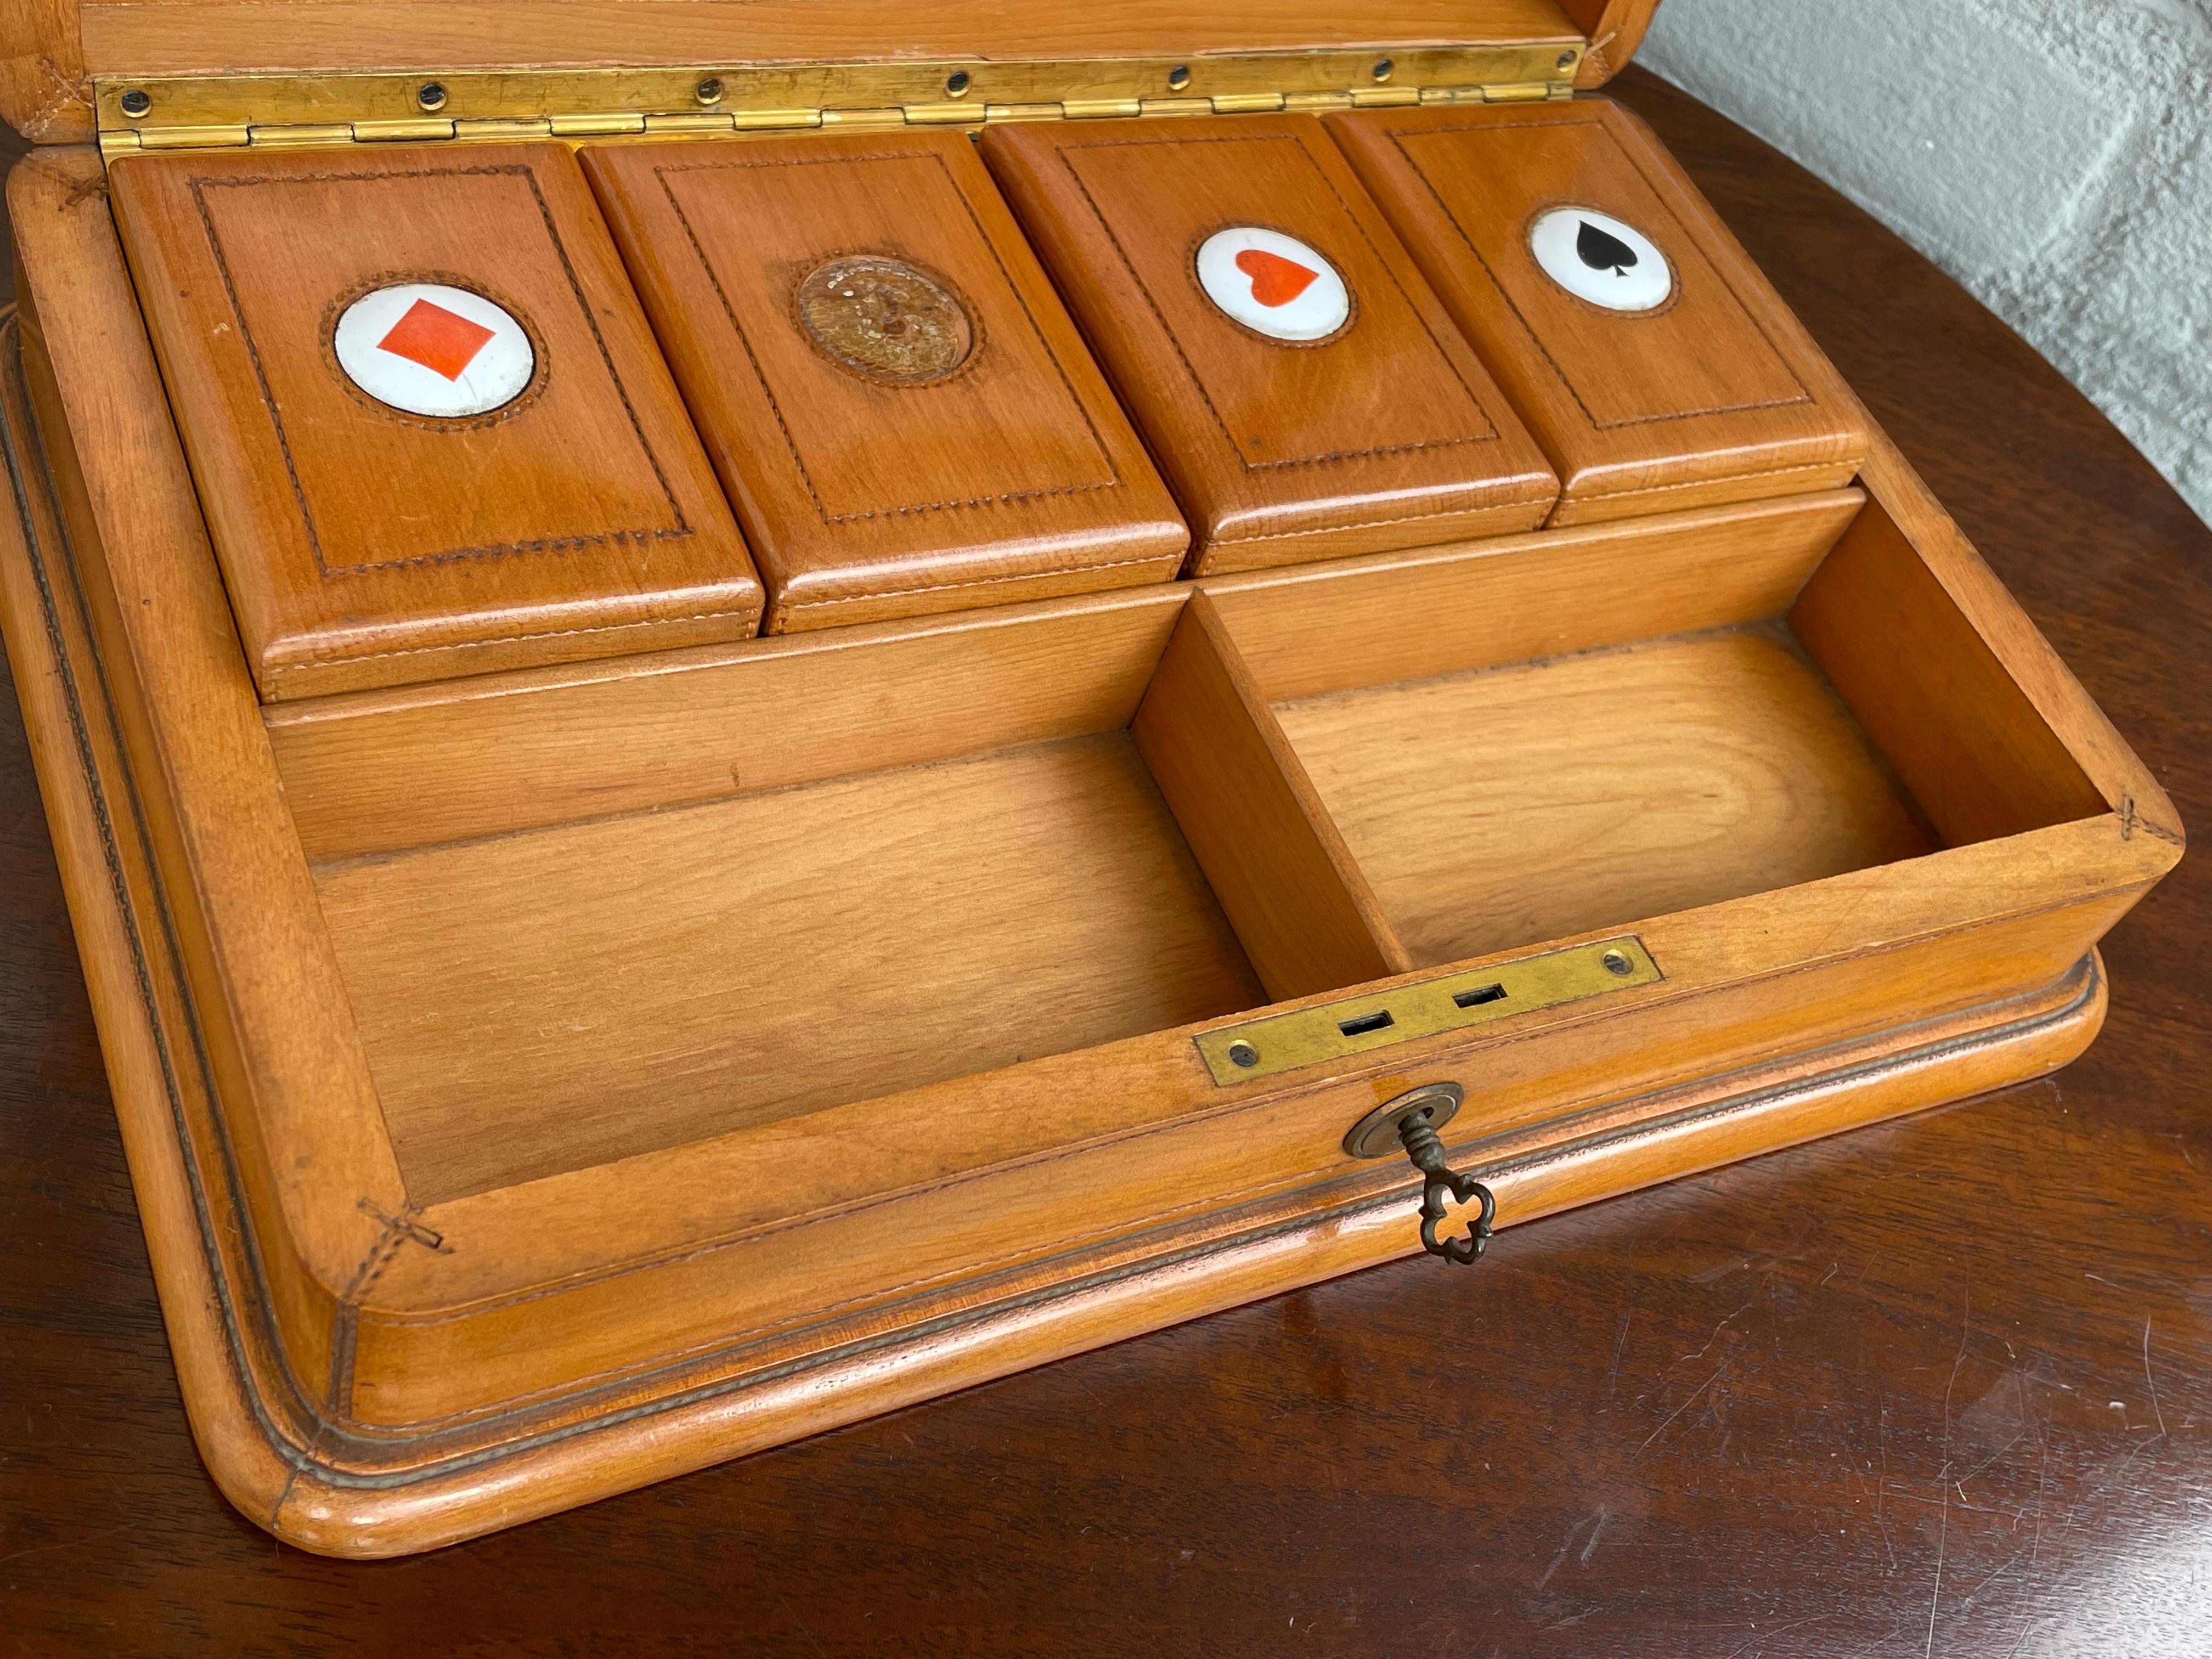 European Small Collection of Rare Antique & Enamel Inlaid Wooden Boxes for Playing Cards For Sale